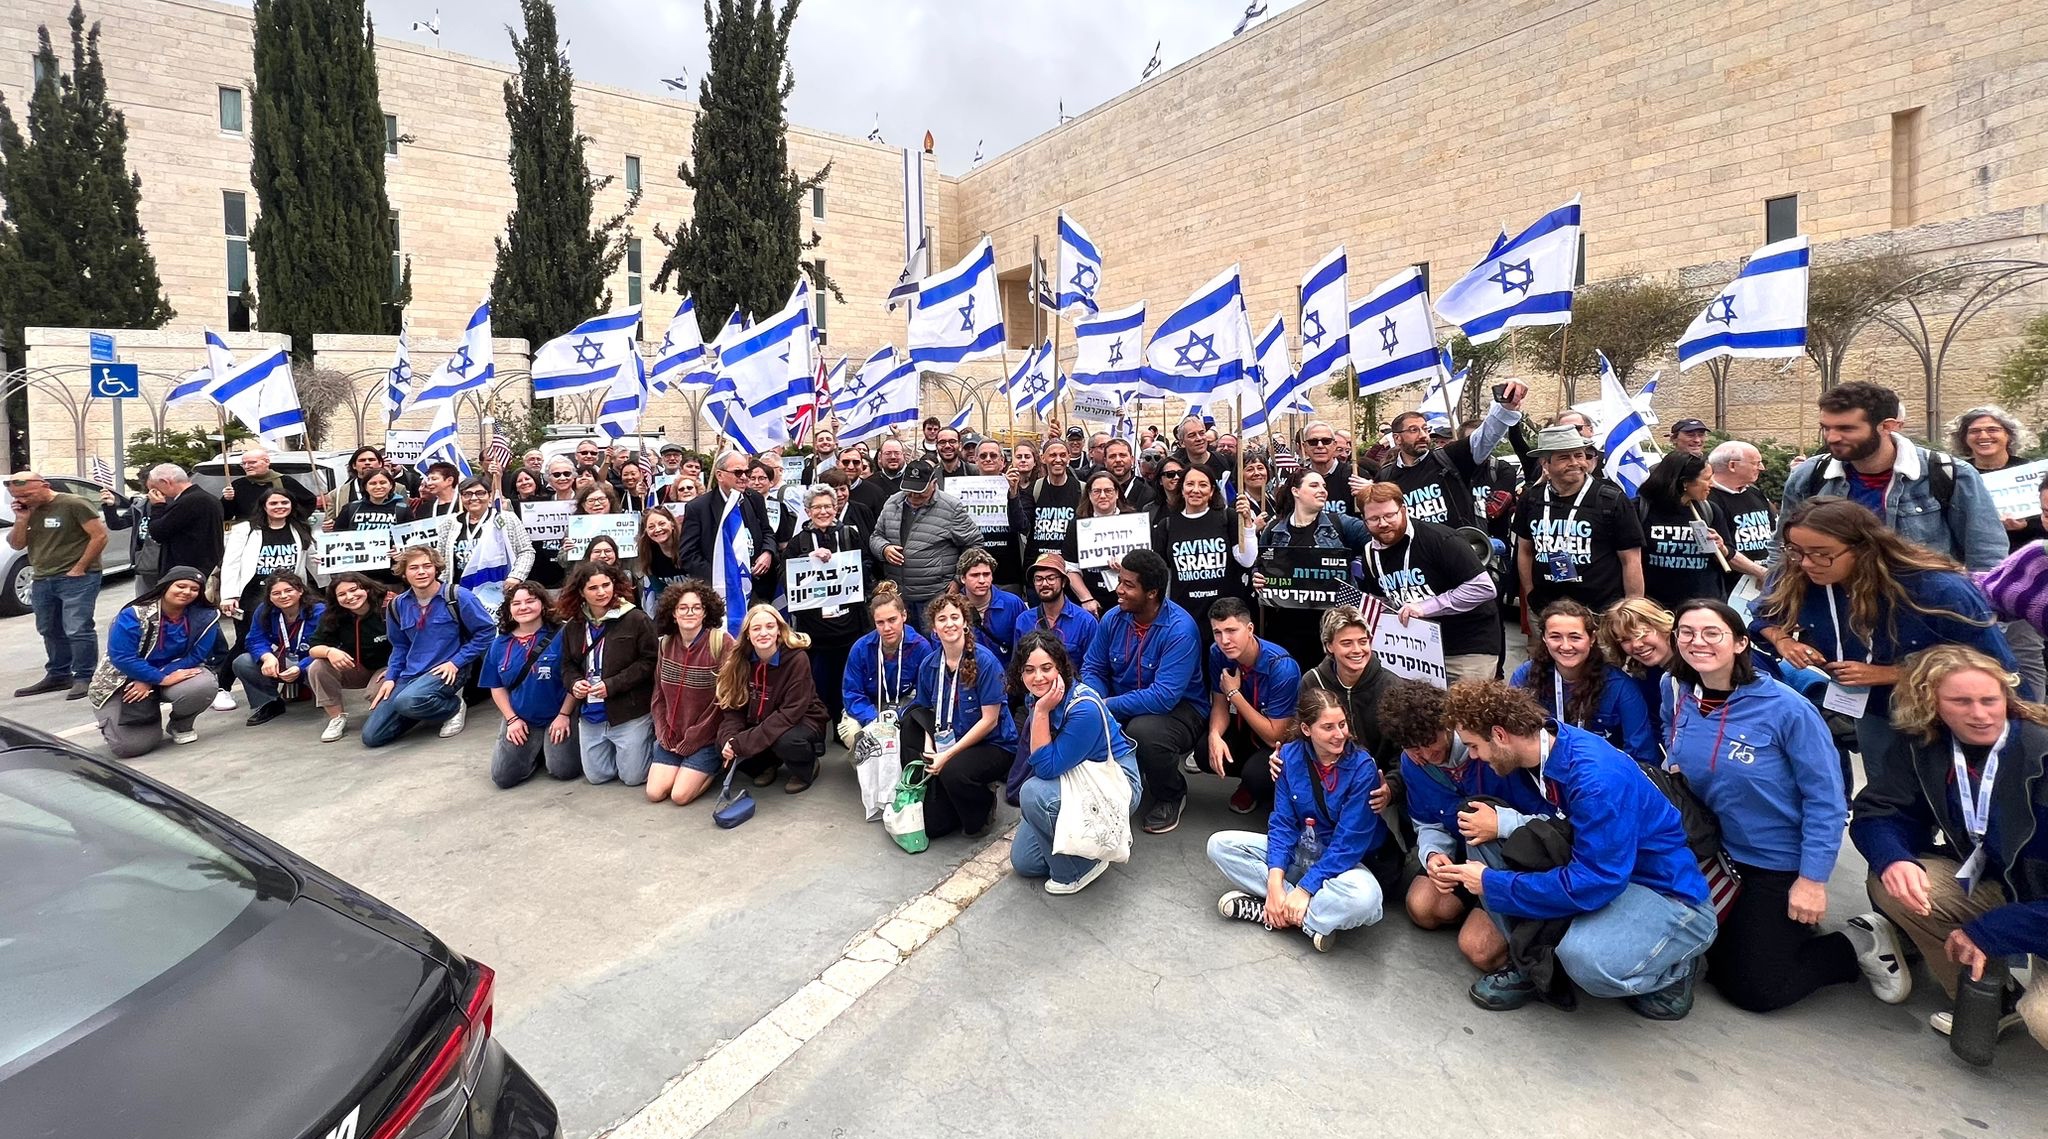 Delegates to the World Zionist Congress protest against the Netanyahu government’s proposed changes to the courts, at the Supreme Court in Jerusalem, April 20, 2023. (Josh Drill)